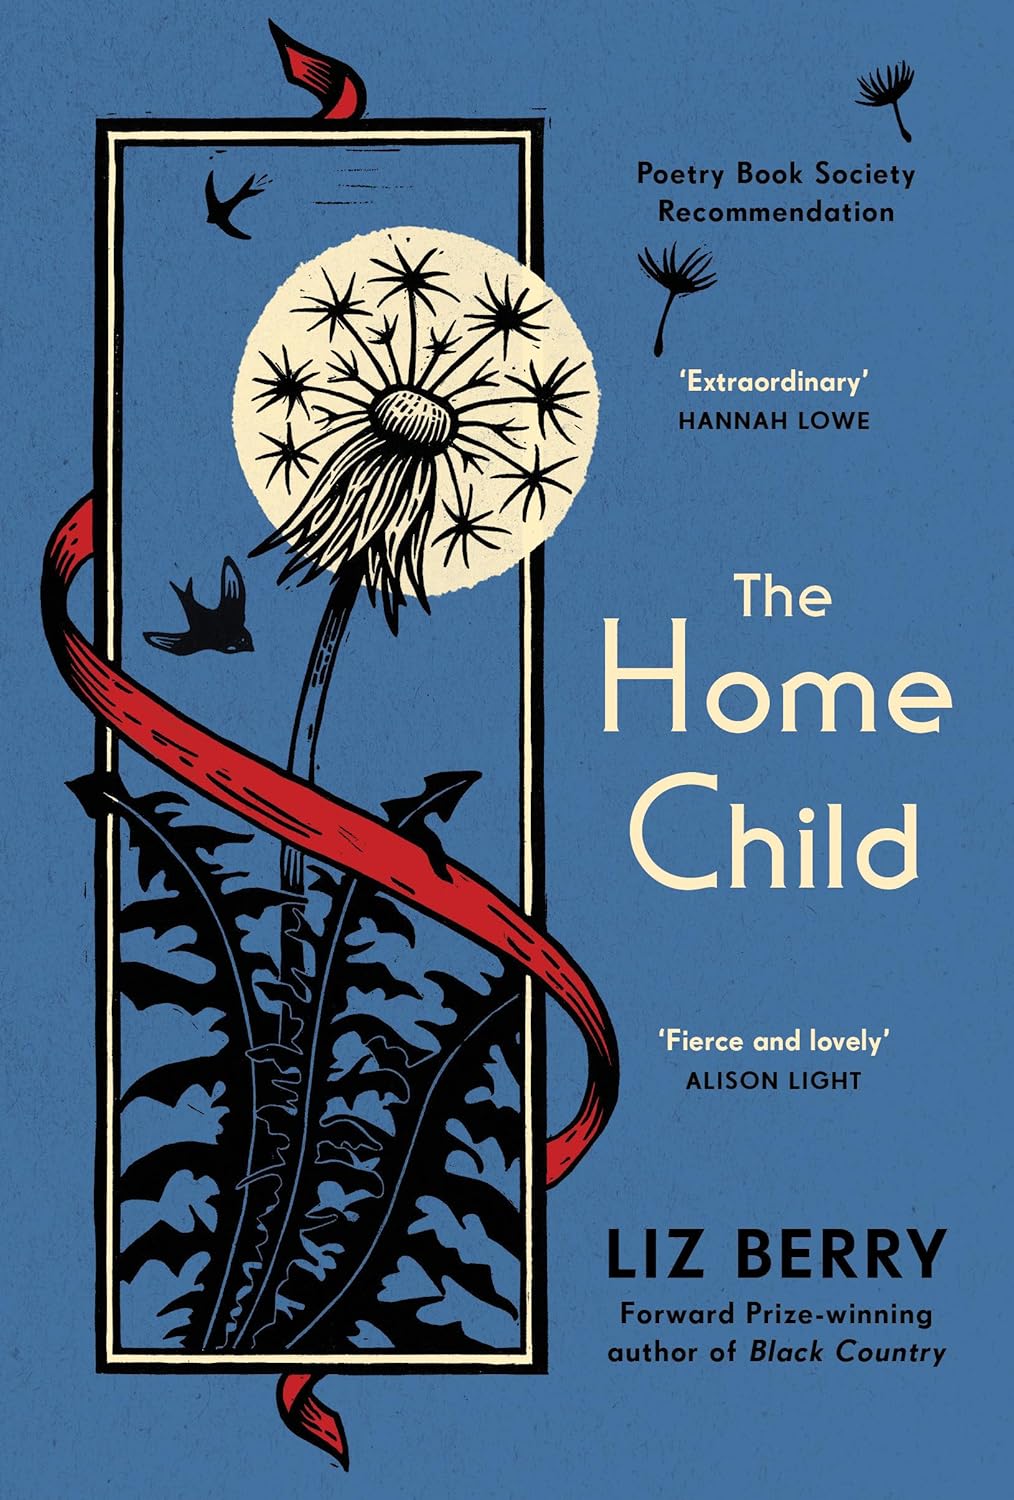 Flash Deal in Progress! Unlock Your Savings on The Home Child by the Forward Prize-winning author of Black Country